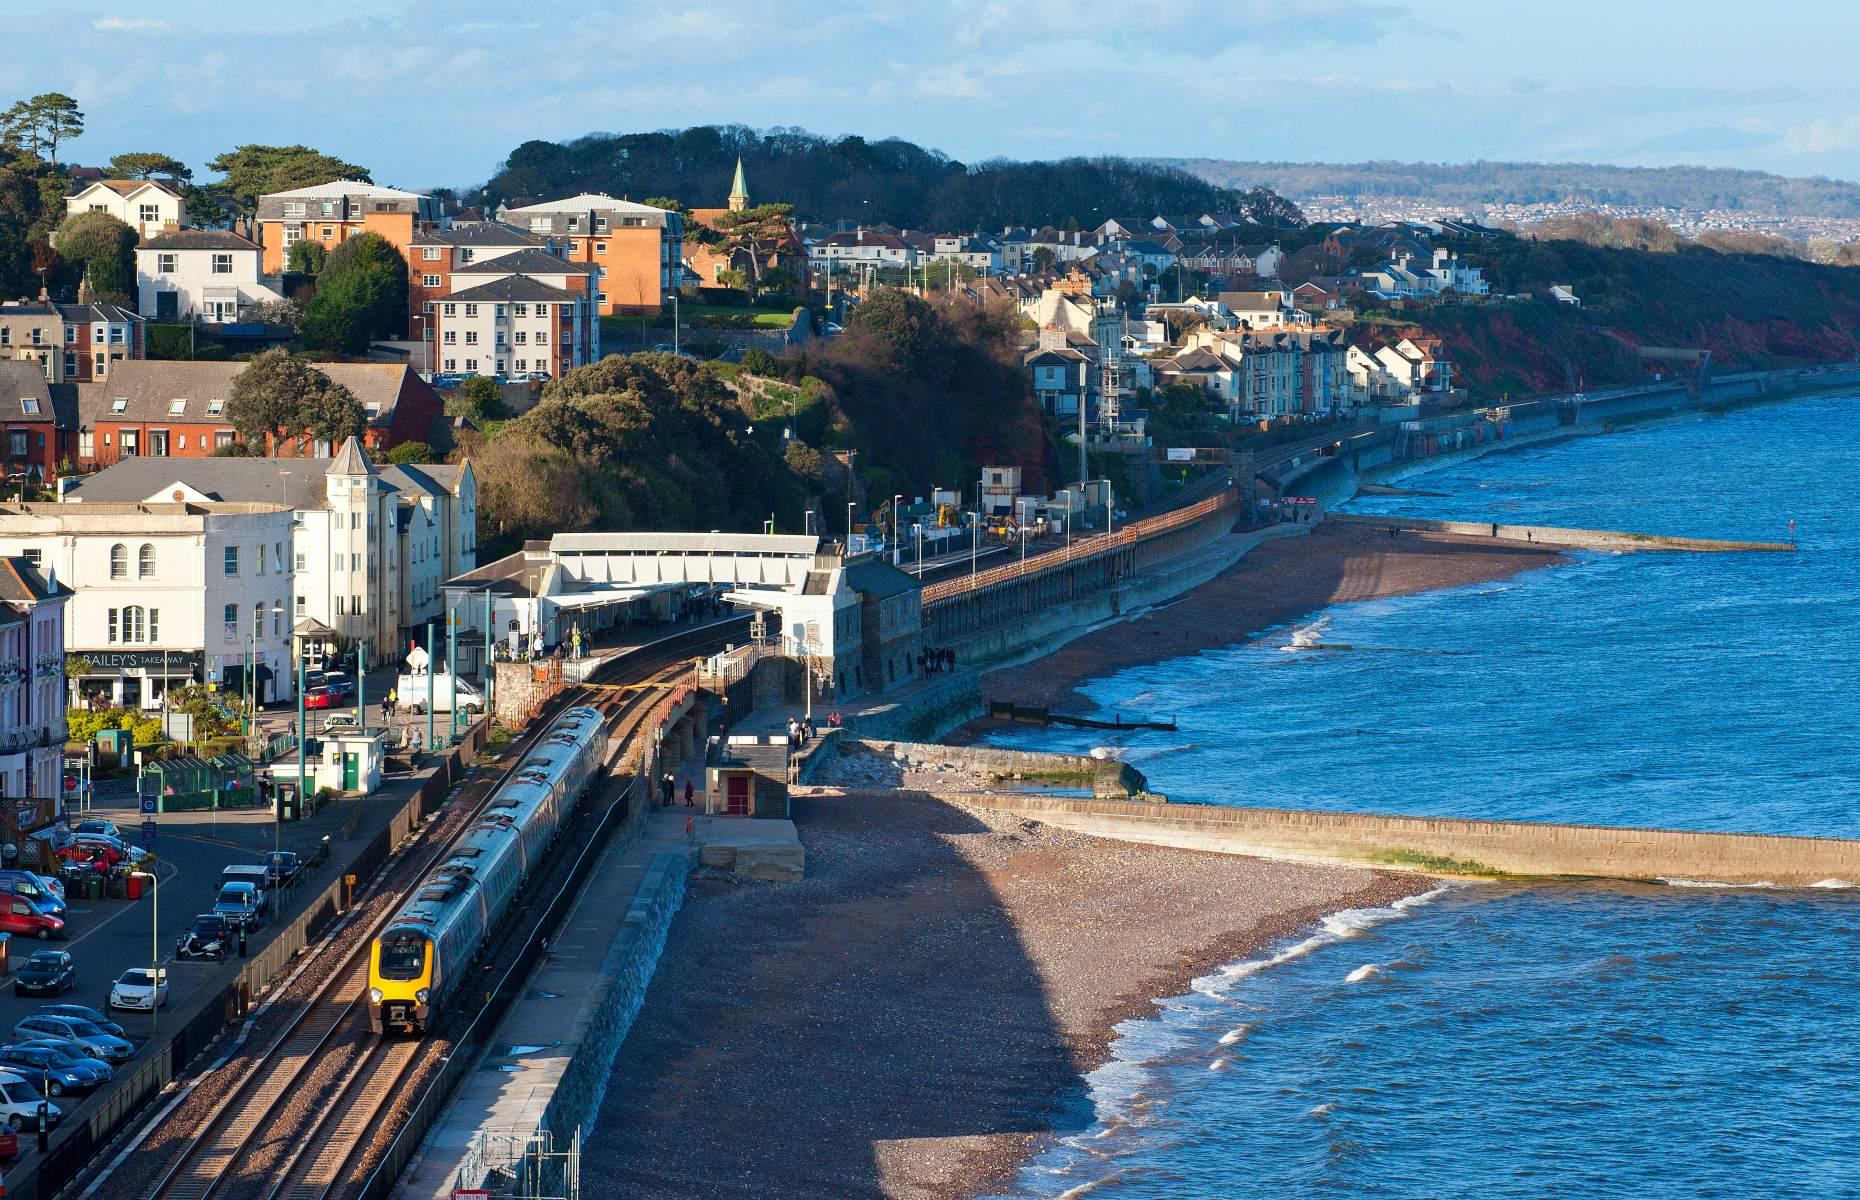 <p>The <a href="https://greatscenicrailways.co.uk/lines/riviera-line/">Riviera Line</a> runs 28 miles (46km) along the south Devon coast between Exeter and Paignton and is one of the country’s much-loved railways. Hugging the coastline, the journey begins at the bustling city of Exeter before passing by several pretty seaside towns including Dawlish and Teignmouth, plus dramatic cliff formations as it travels towards the picturesque English Riviera to Paignton.</p>